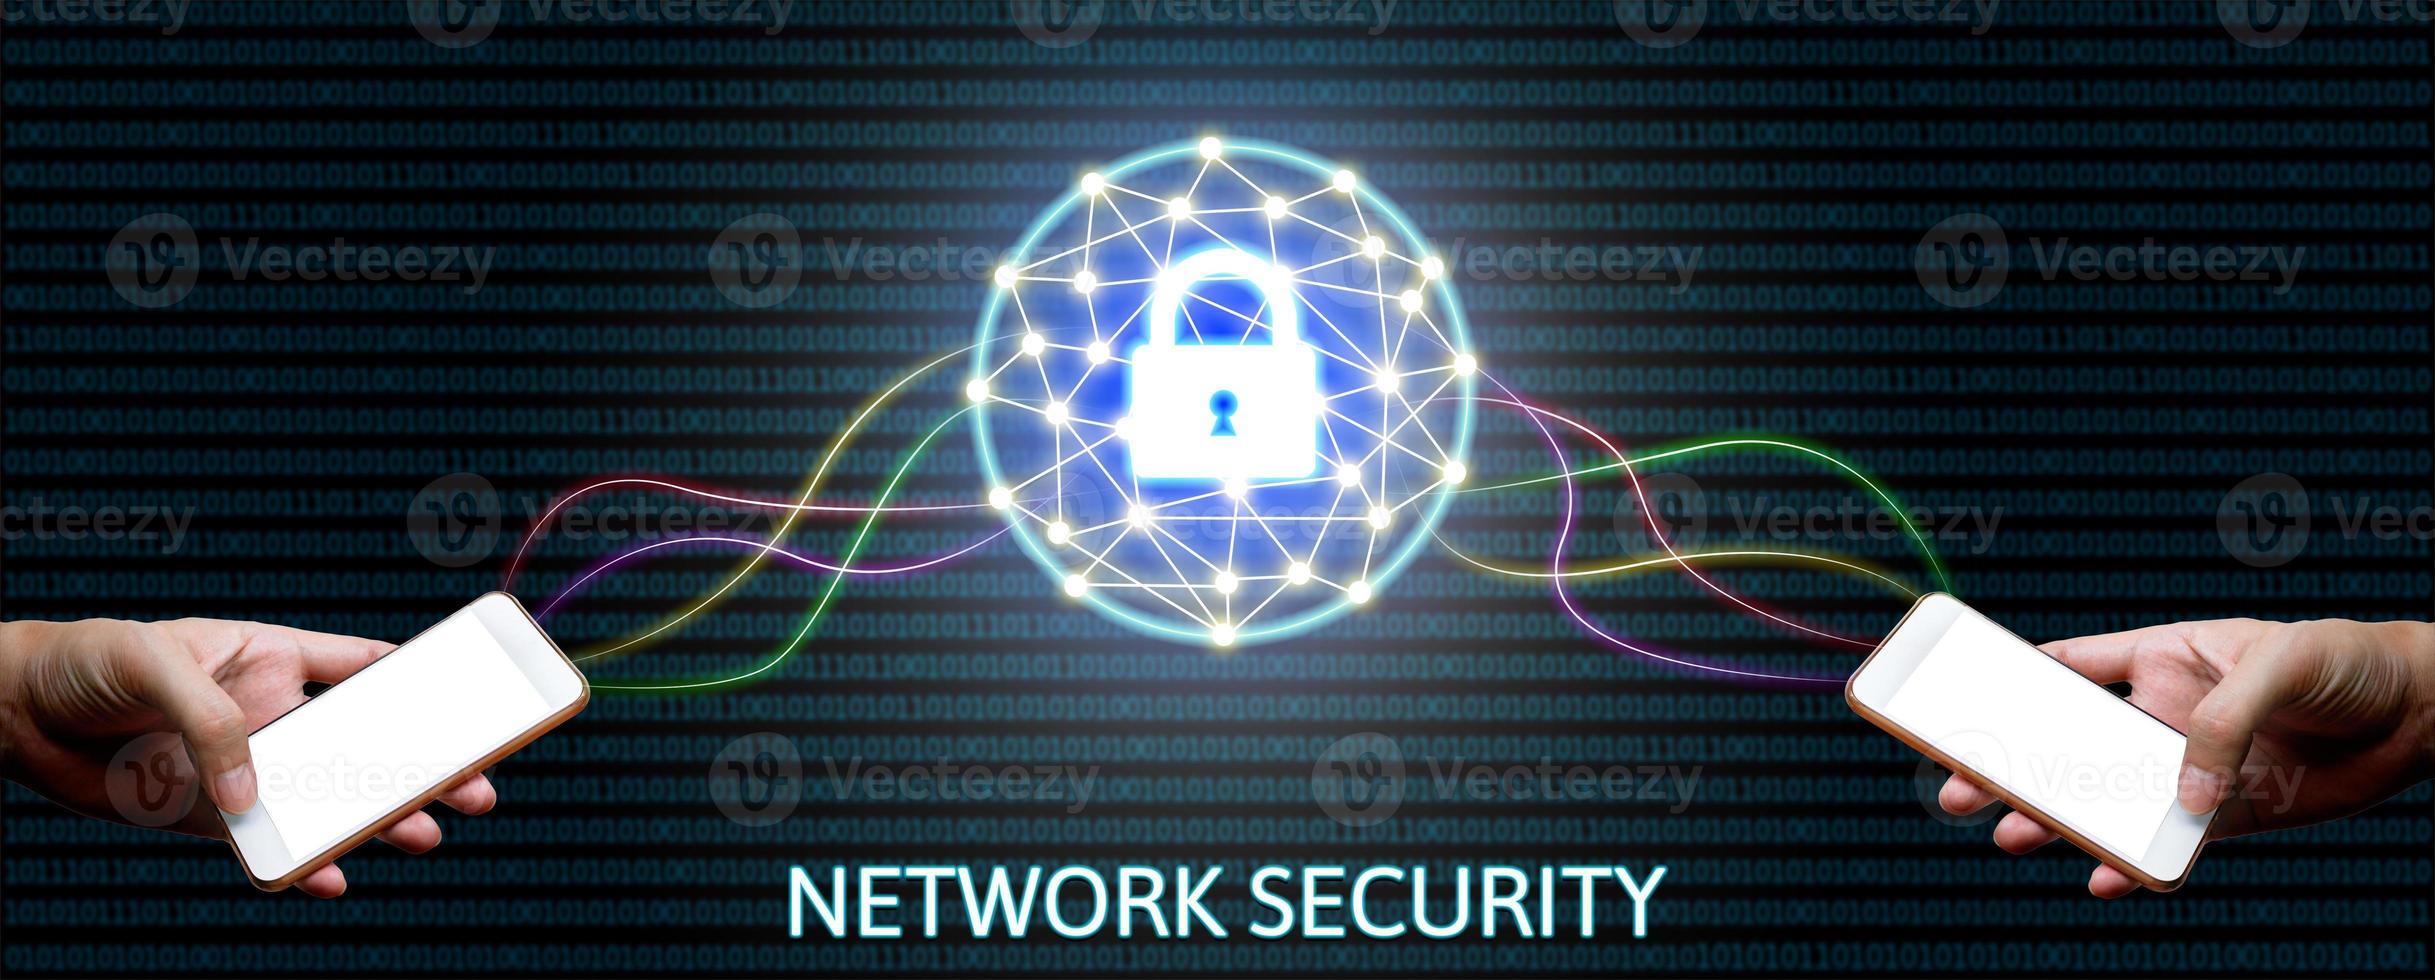 Cyber security network concept, man holding smartphone with lock networking and binary background. photo